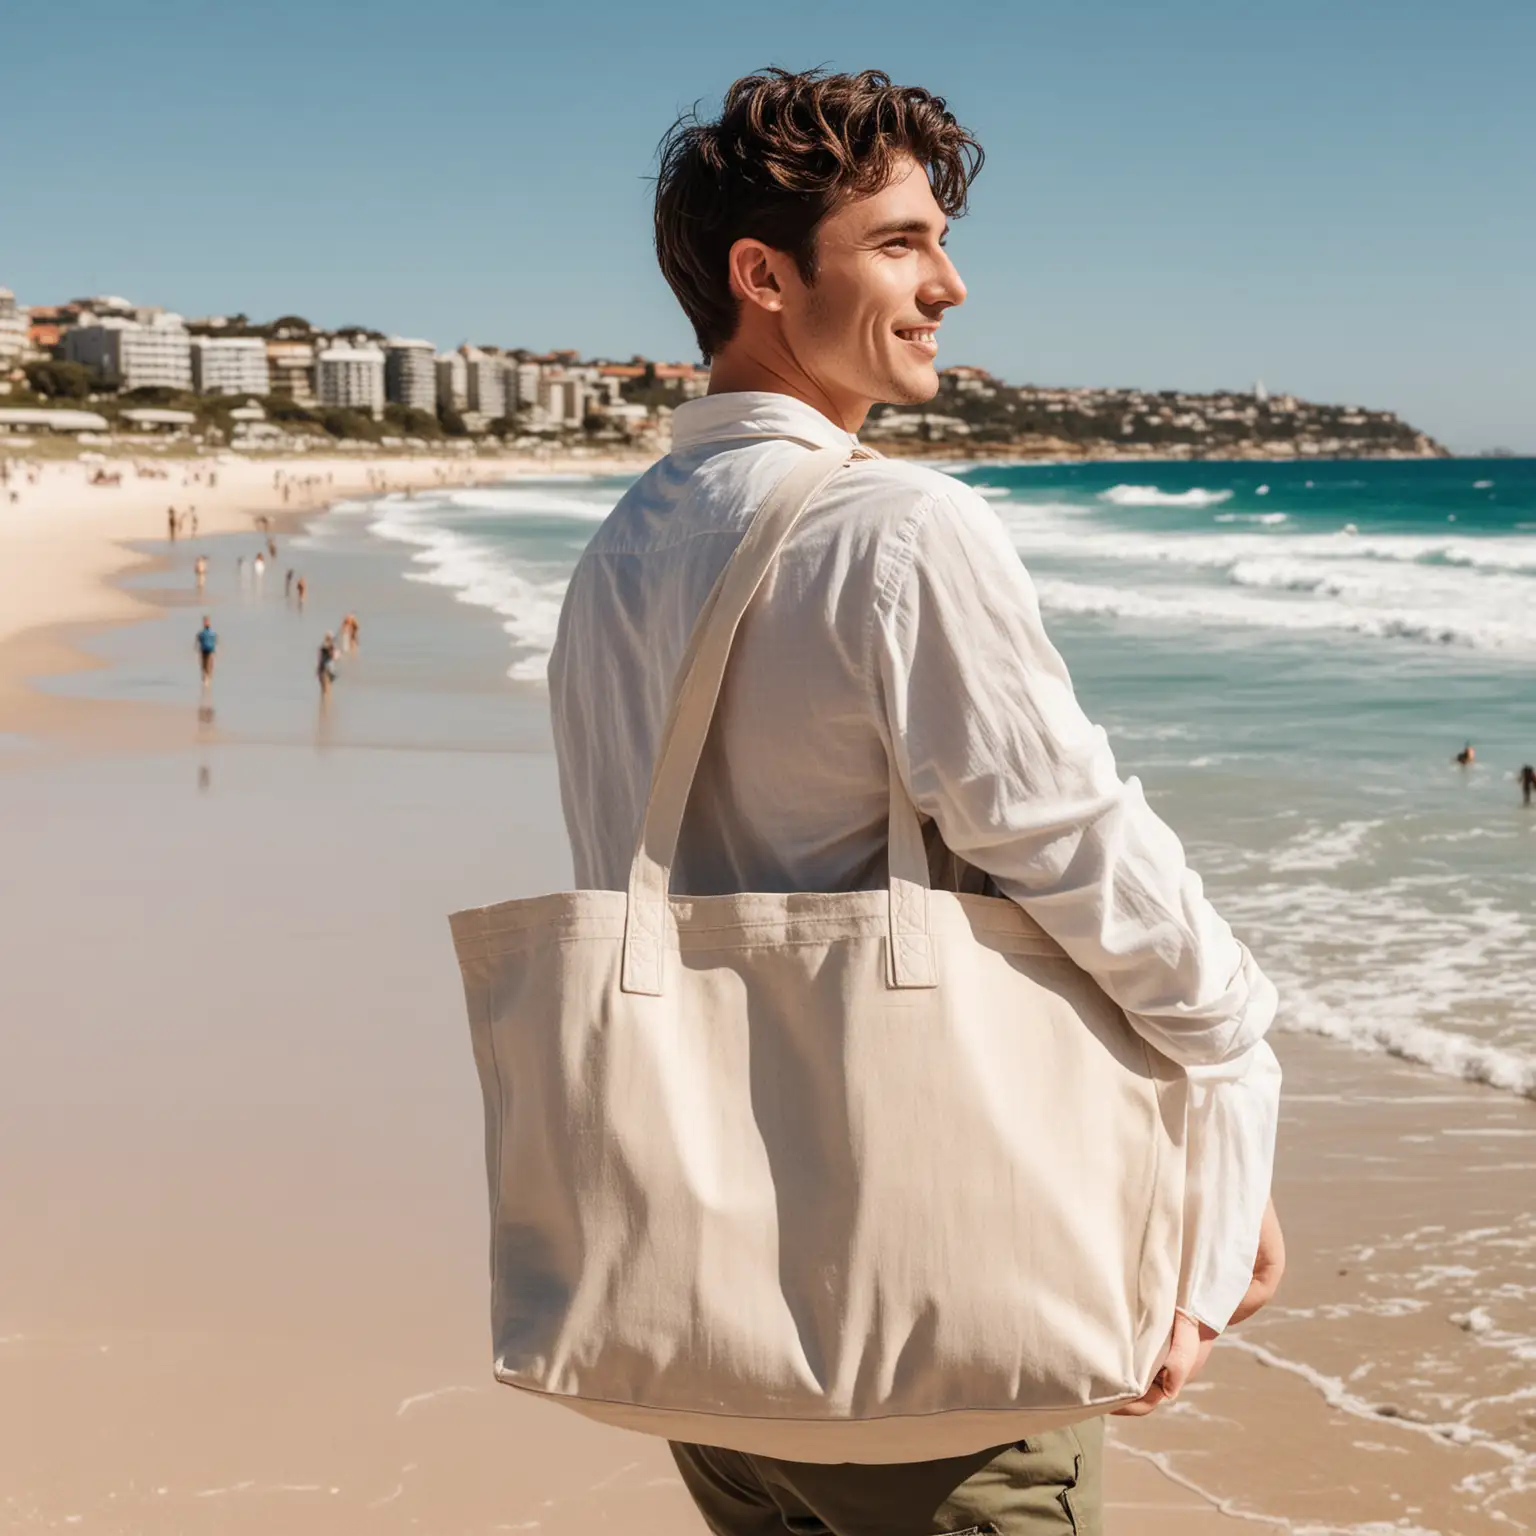 Young Man with Canvas Tote Bag at Bondi Beach Embracing the Relaxed Holiday Vibe